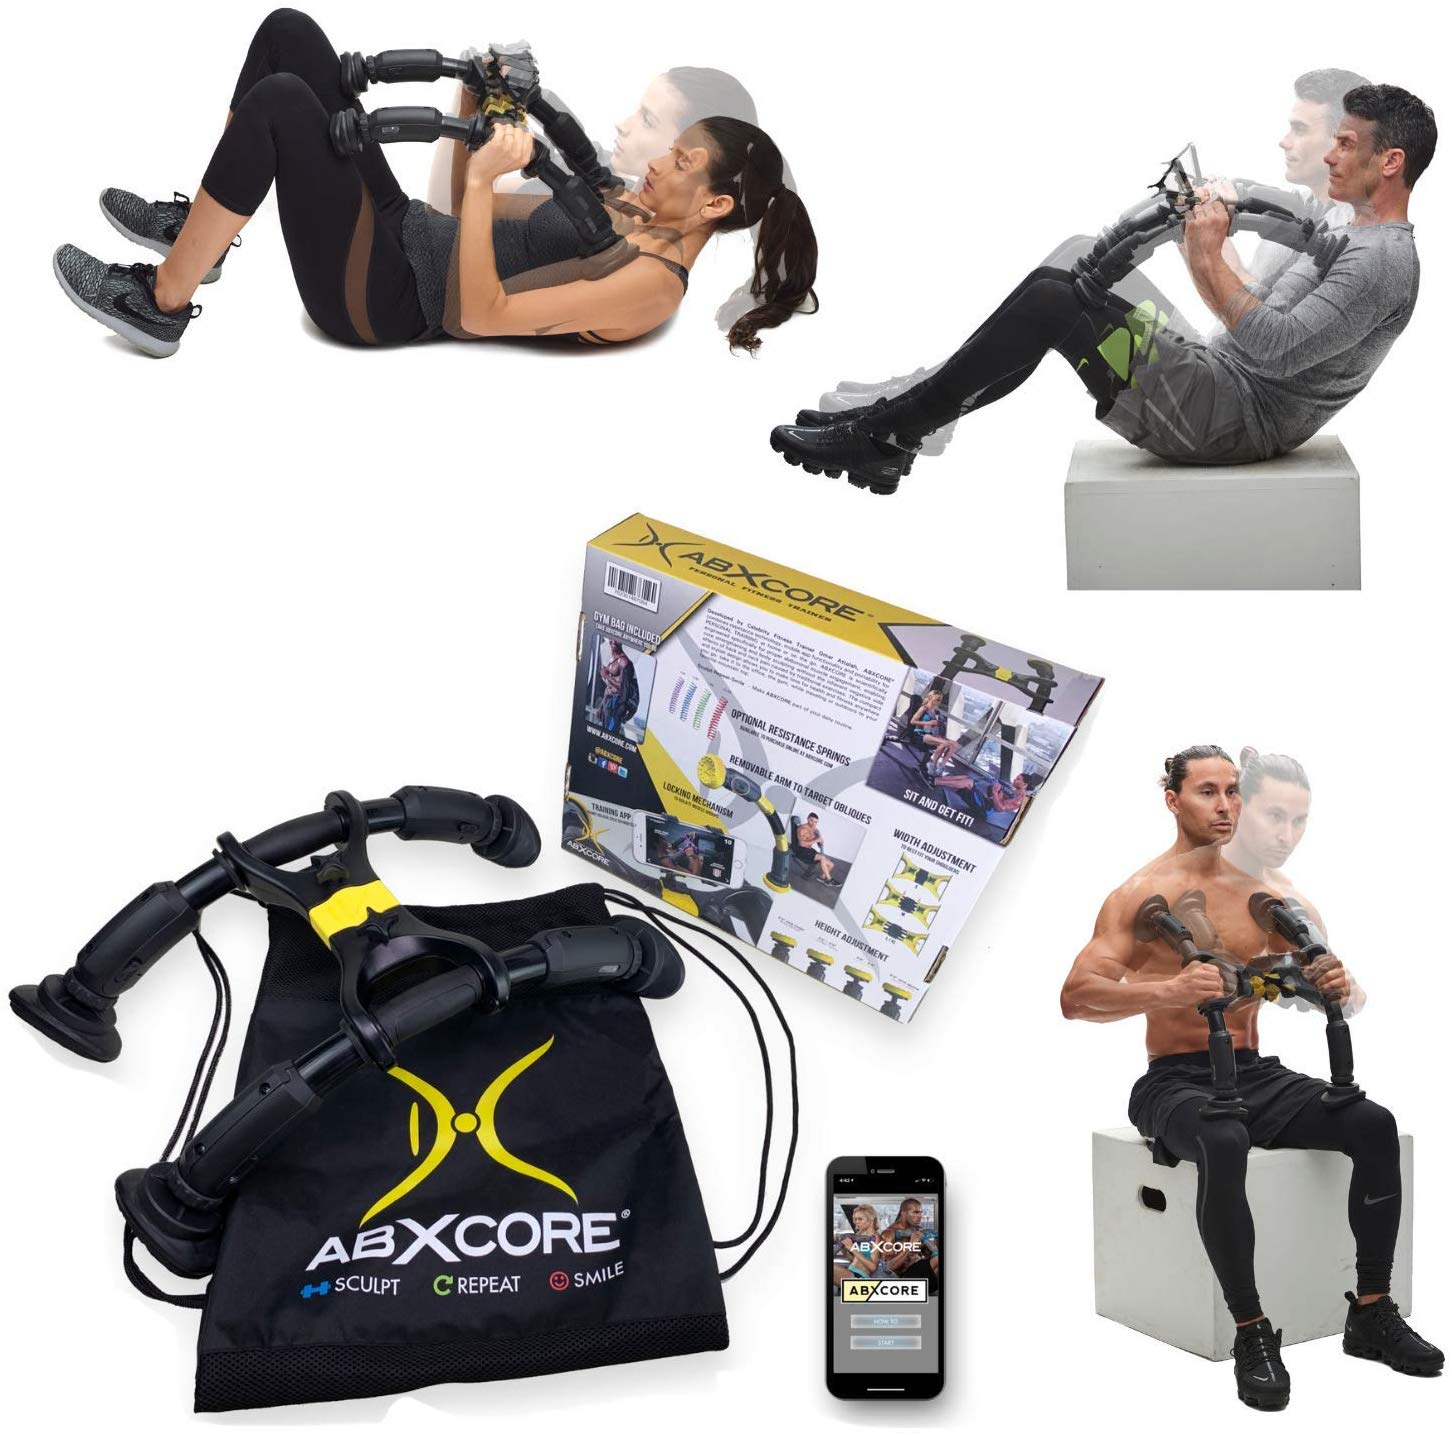 AbXcore for Abs Workout - Ab Machine Exercise Equipment for Home Gym. Resistance Abdominal Muscle Toner, Adjustable Ab Trainer & Portable Ab Workout Equipment. Core Workout Abs Machine with Bag + App